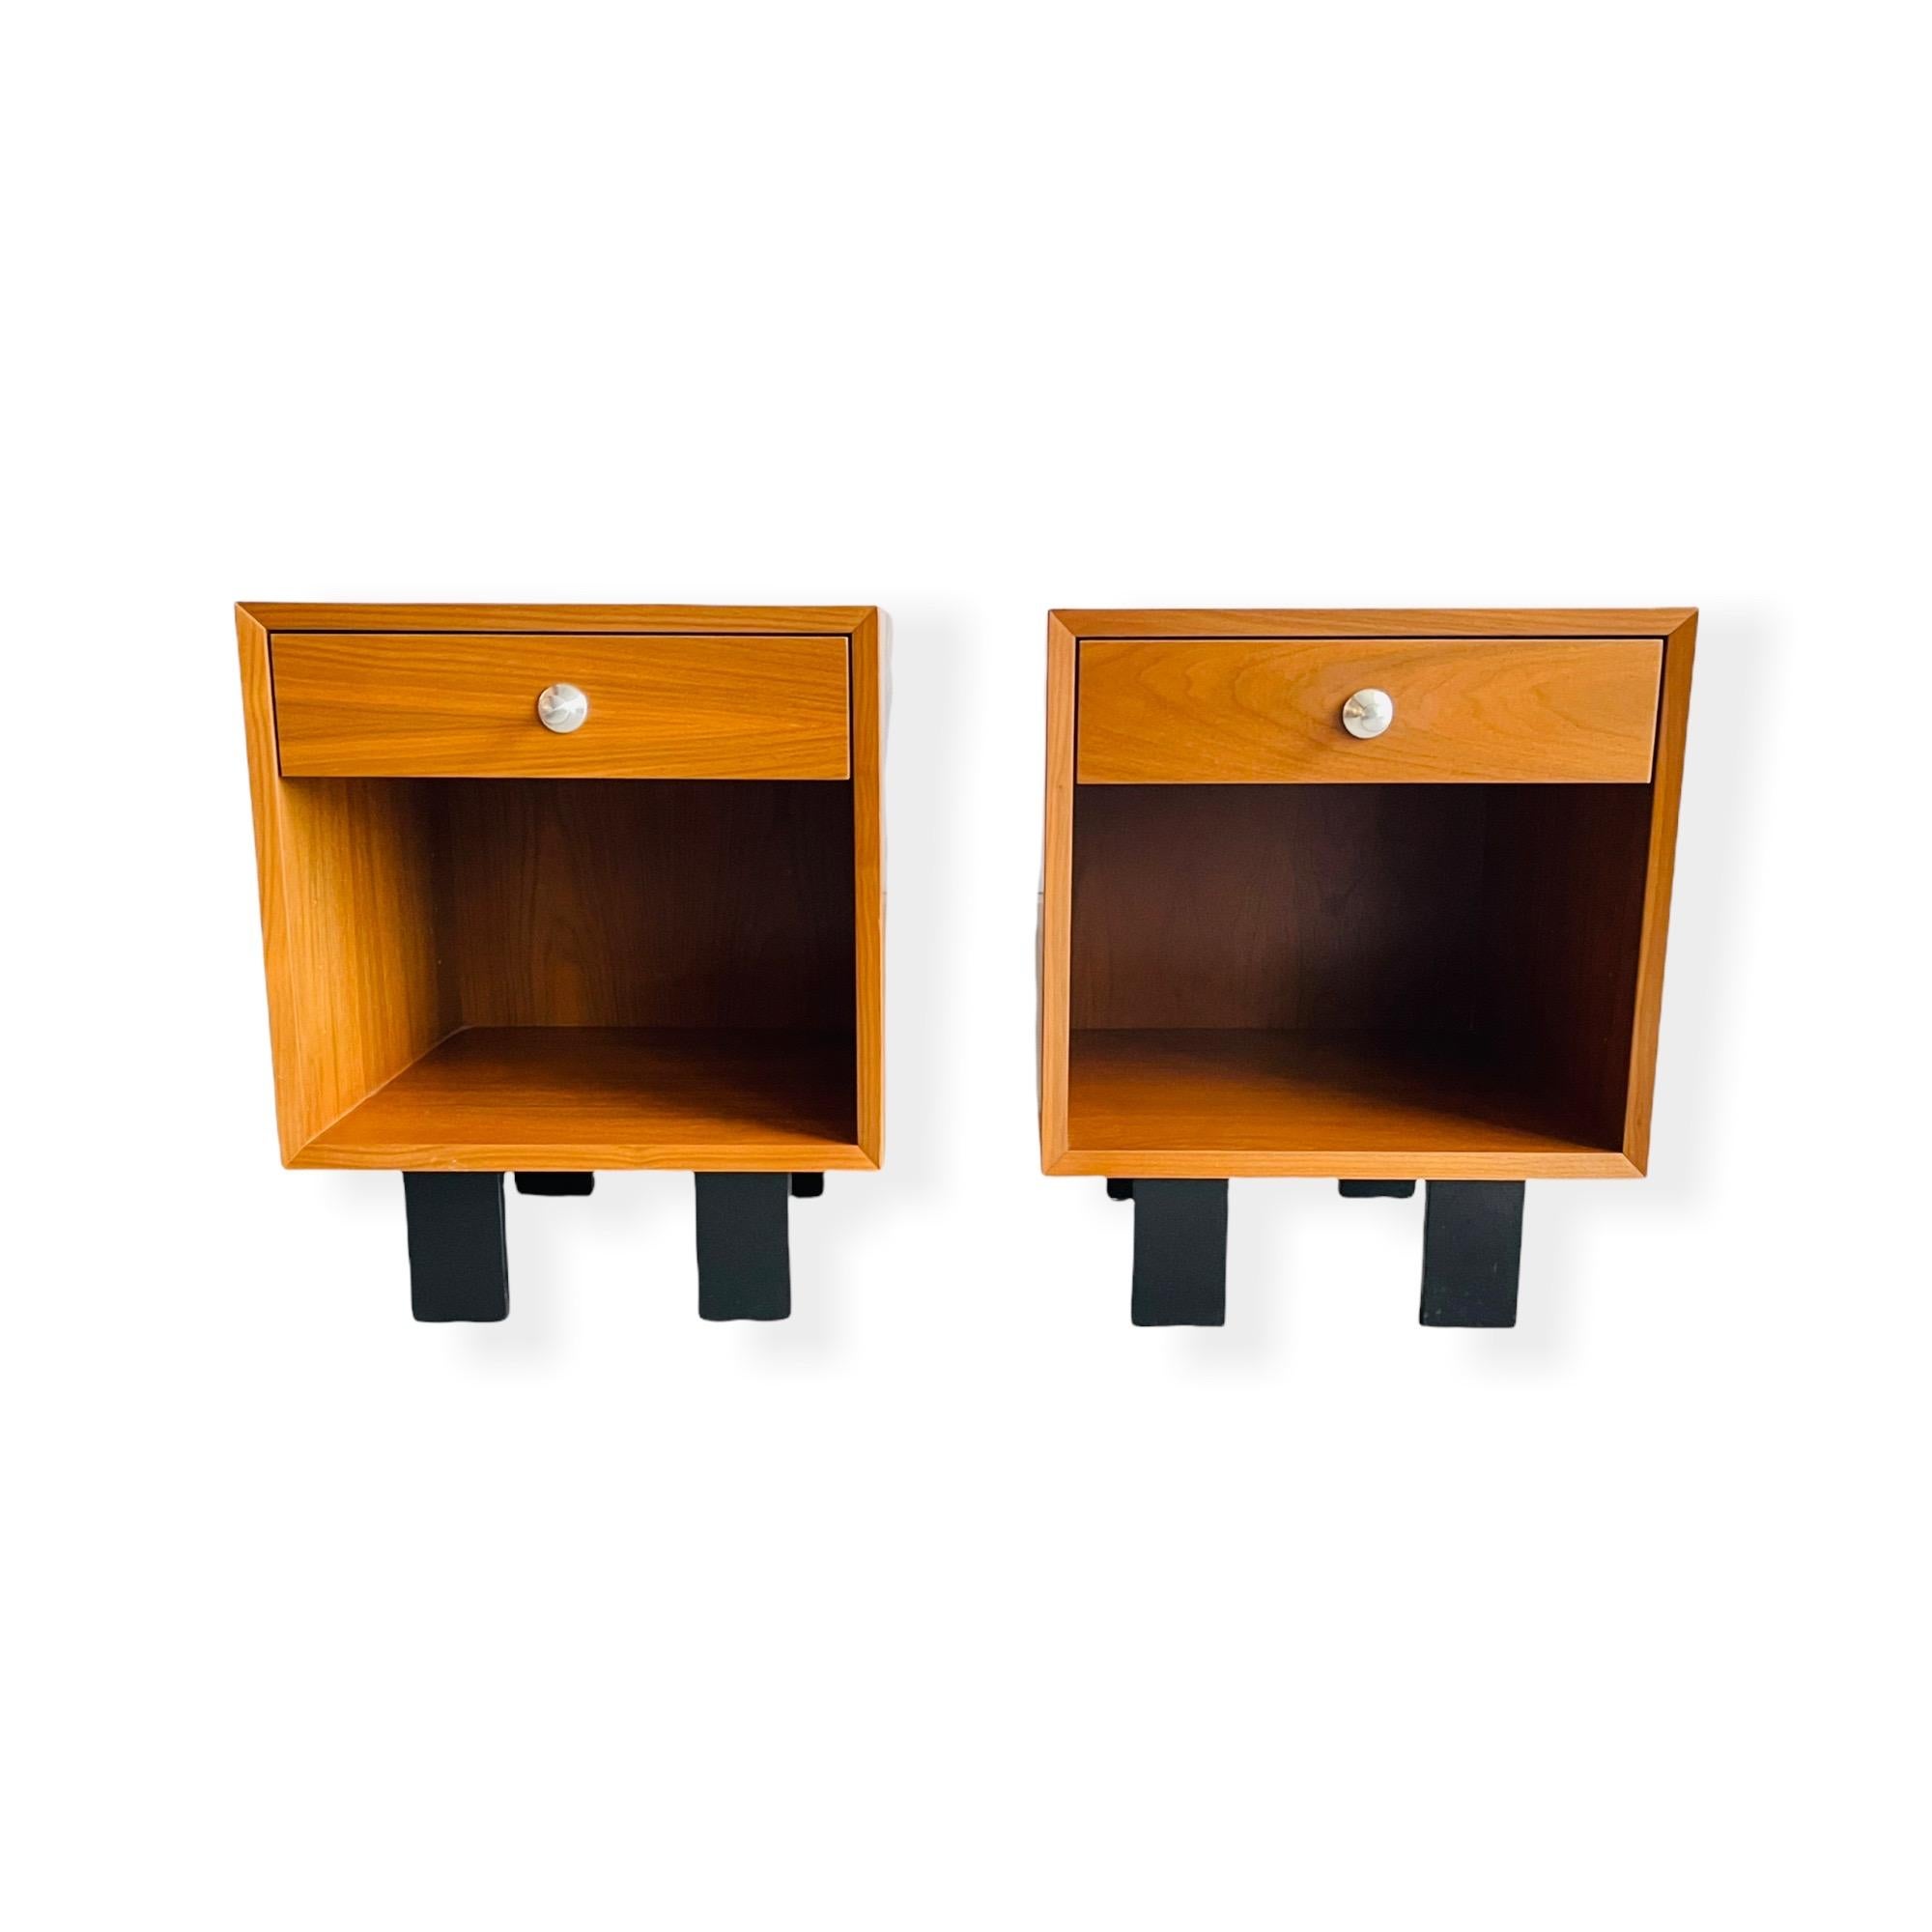 Here is a stunning pair of Mid Century Modern walnut nightstands designed by George Nelson for Herman Miller circa 1950s. These nightstands features a single smooth drawer, storage space below and black lacquered feet. The nightstands are labeled